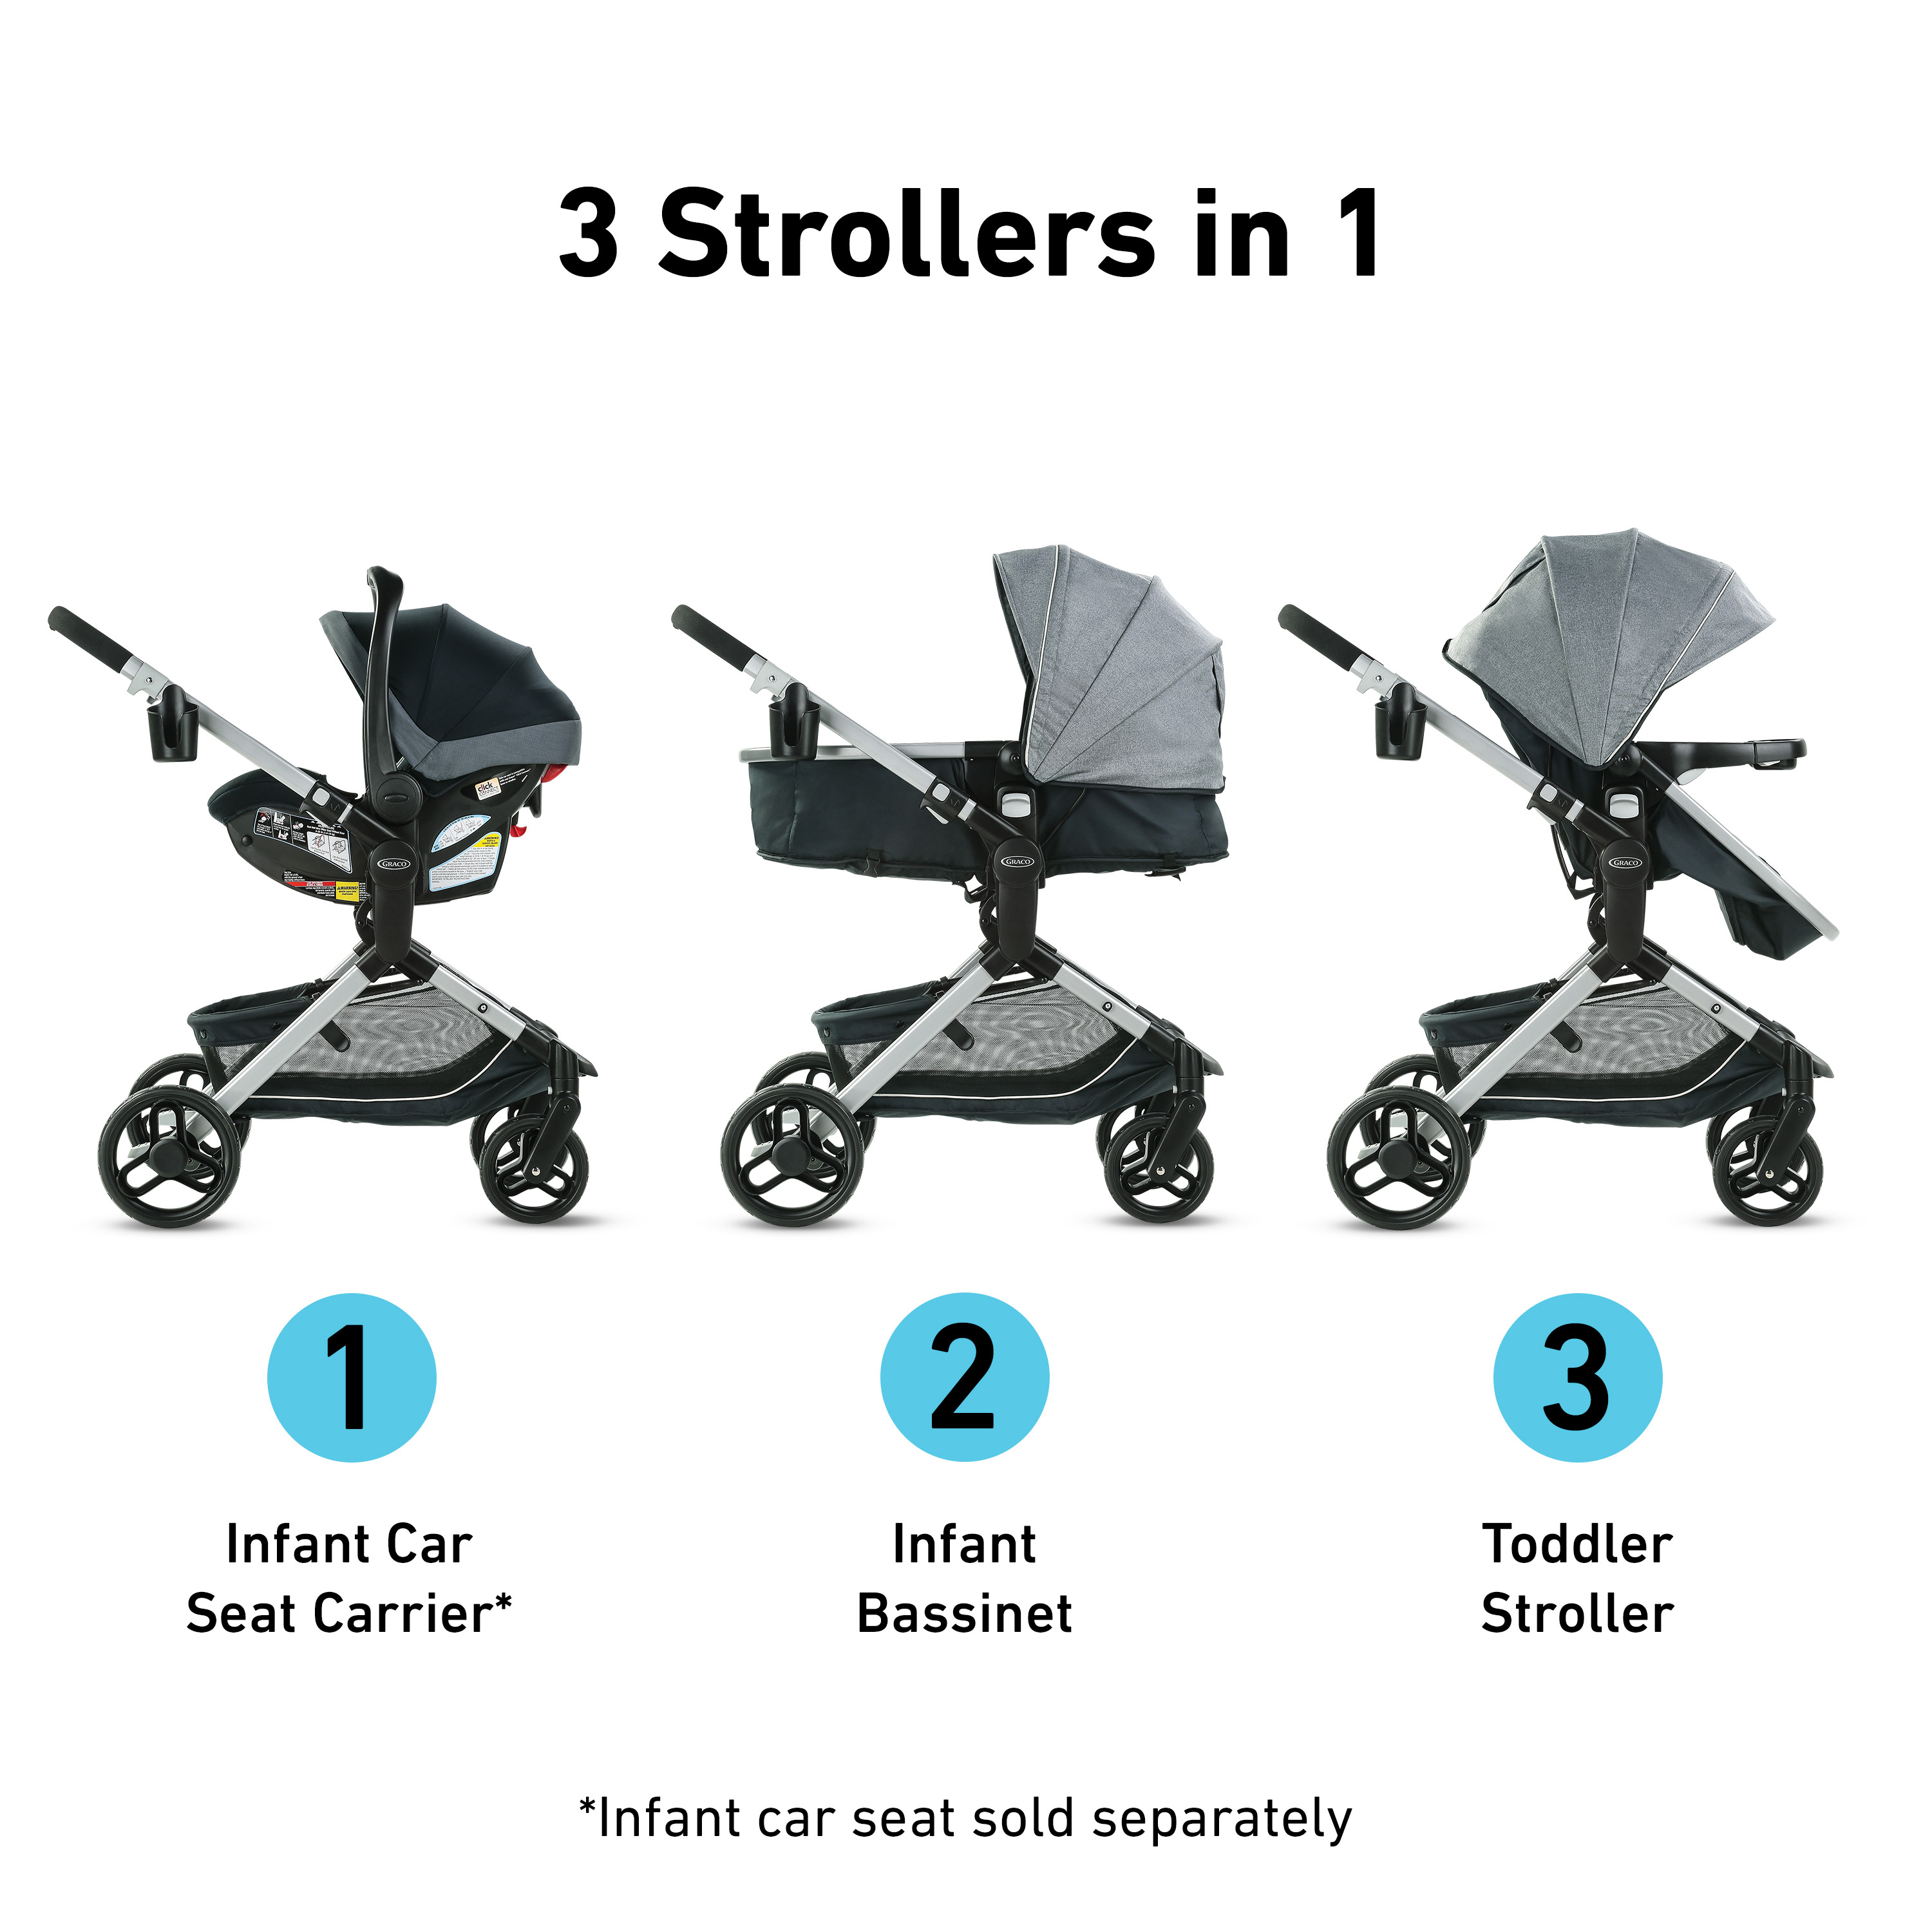 graco modes stroller accessories